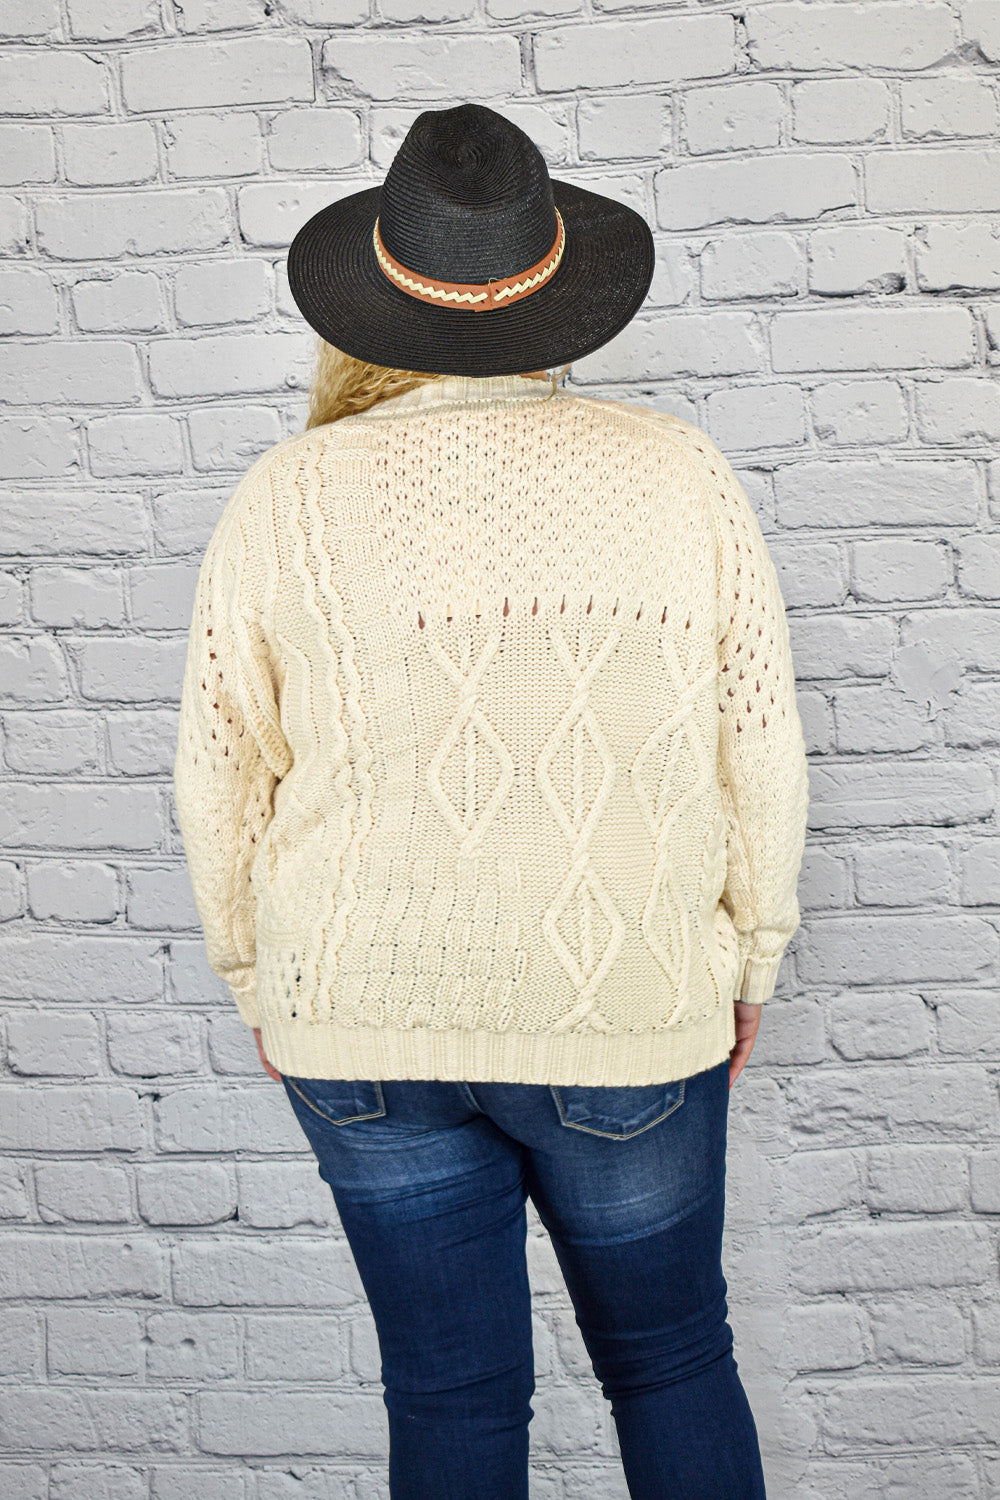 Cream Cable Knit Leggings, Knitwear